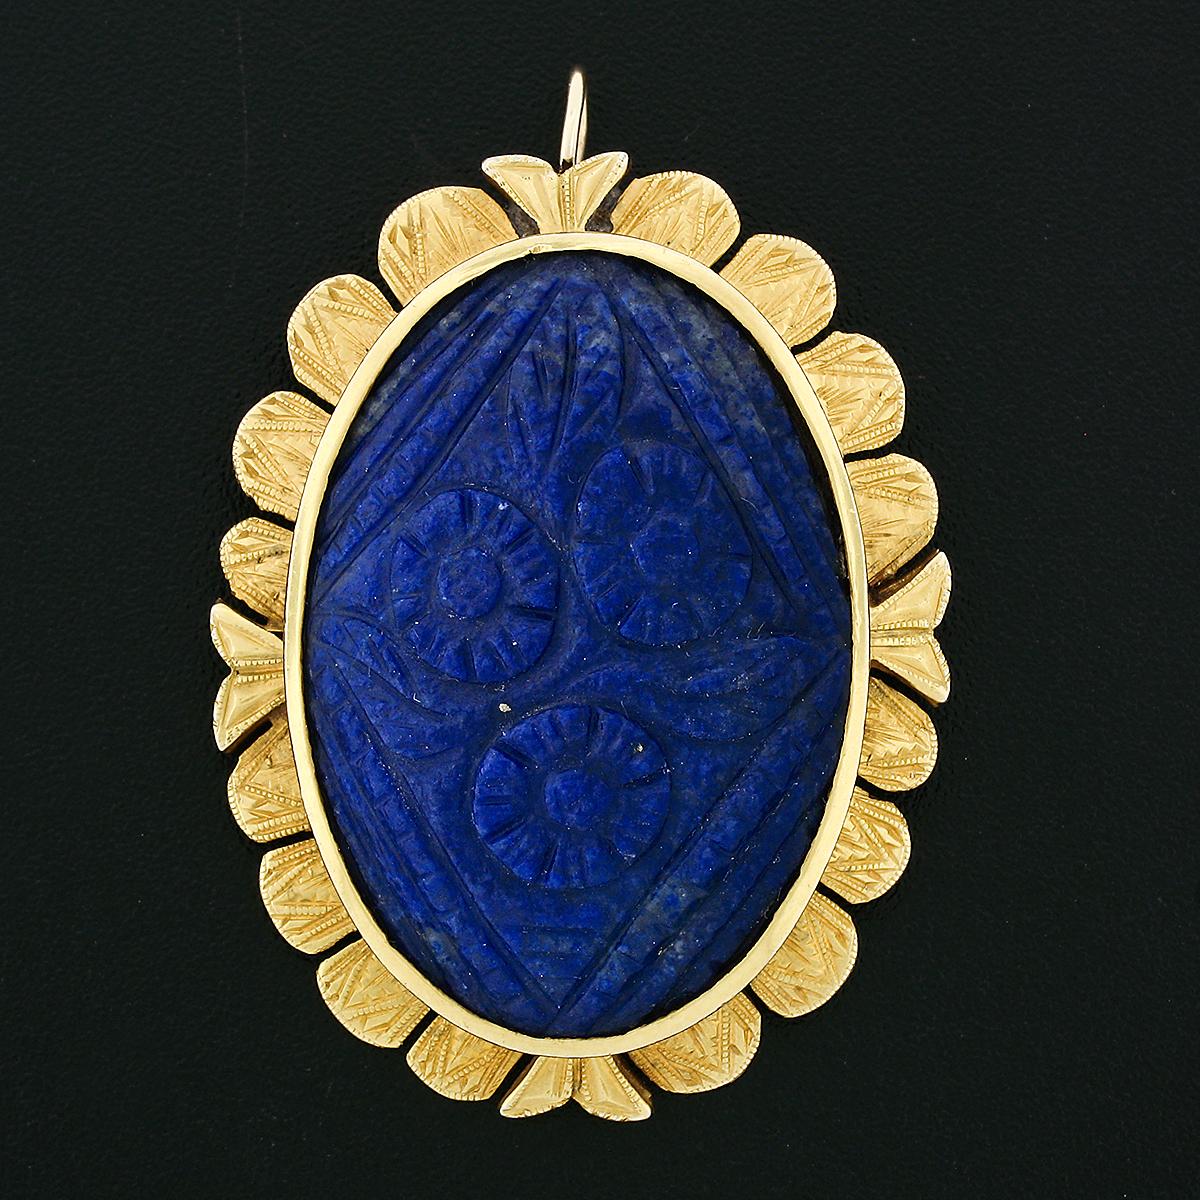 Here we have an antique pendant or brooch that was crafted from solid 14k yellow gold during the Victorian era. The brooch was made in the Etruscan Revival style and features a magnificent, TOP QUALITY, carved piece of natural lapis lazuli that is